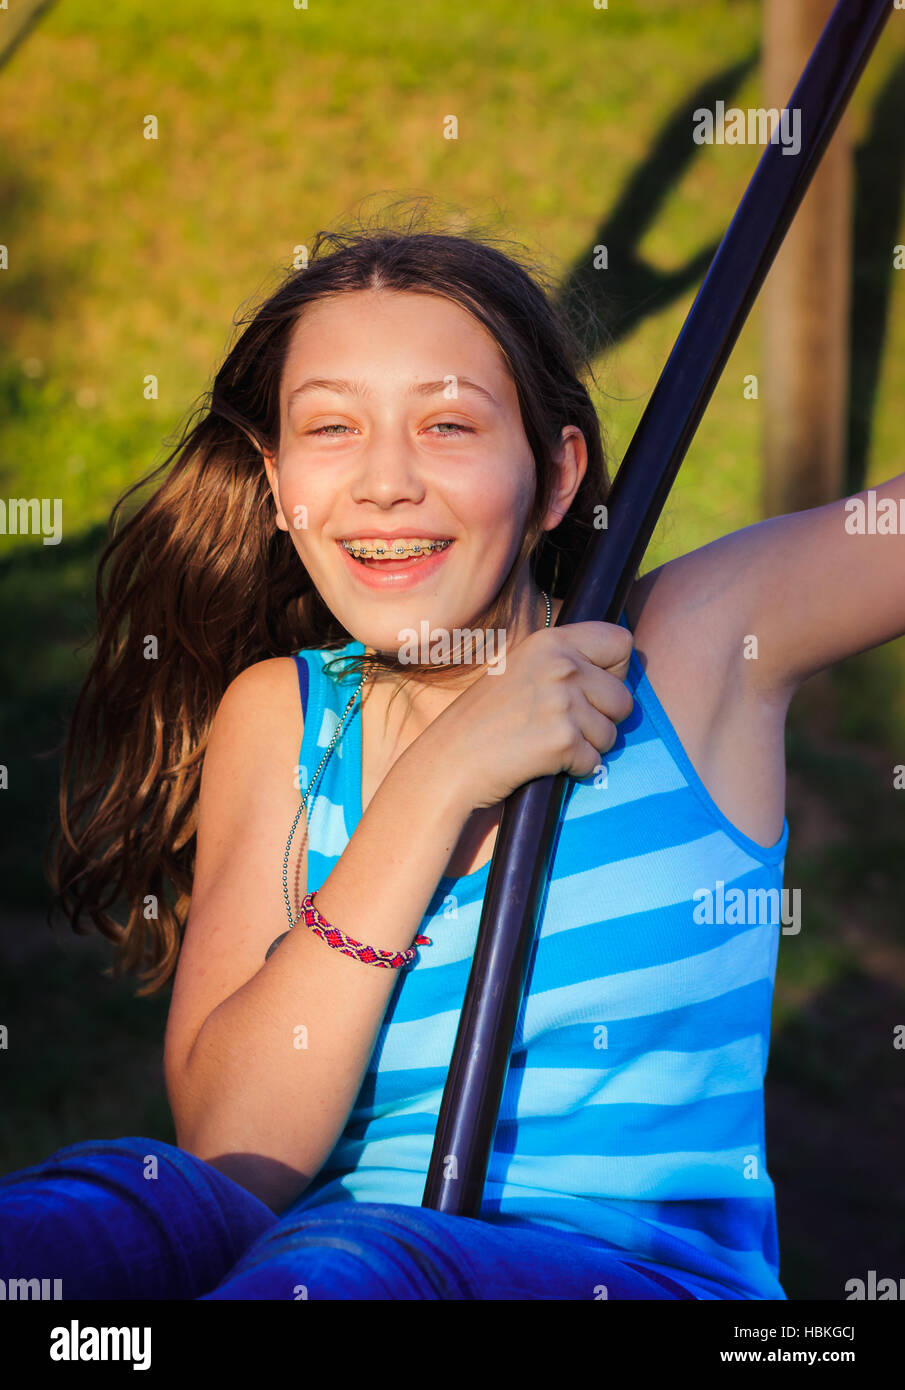 Teenager on a swing Stock Photo